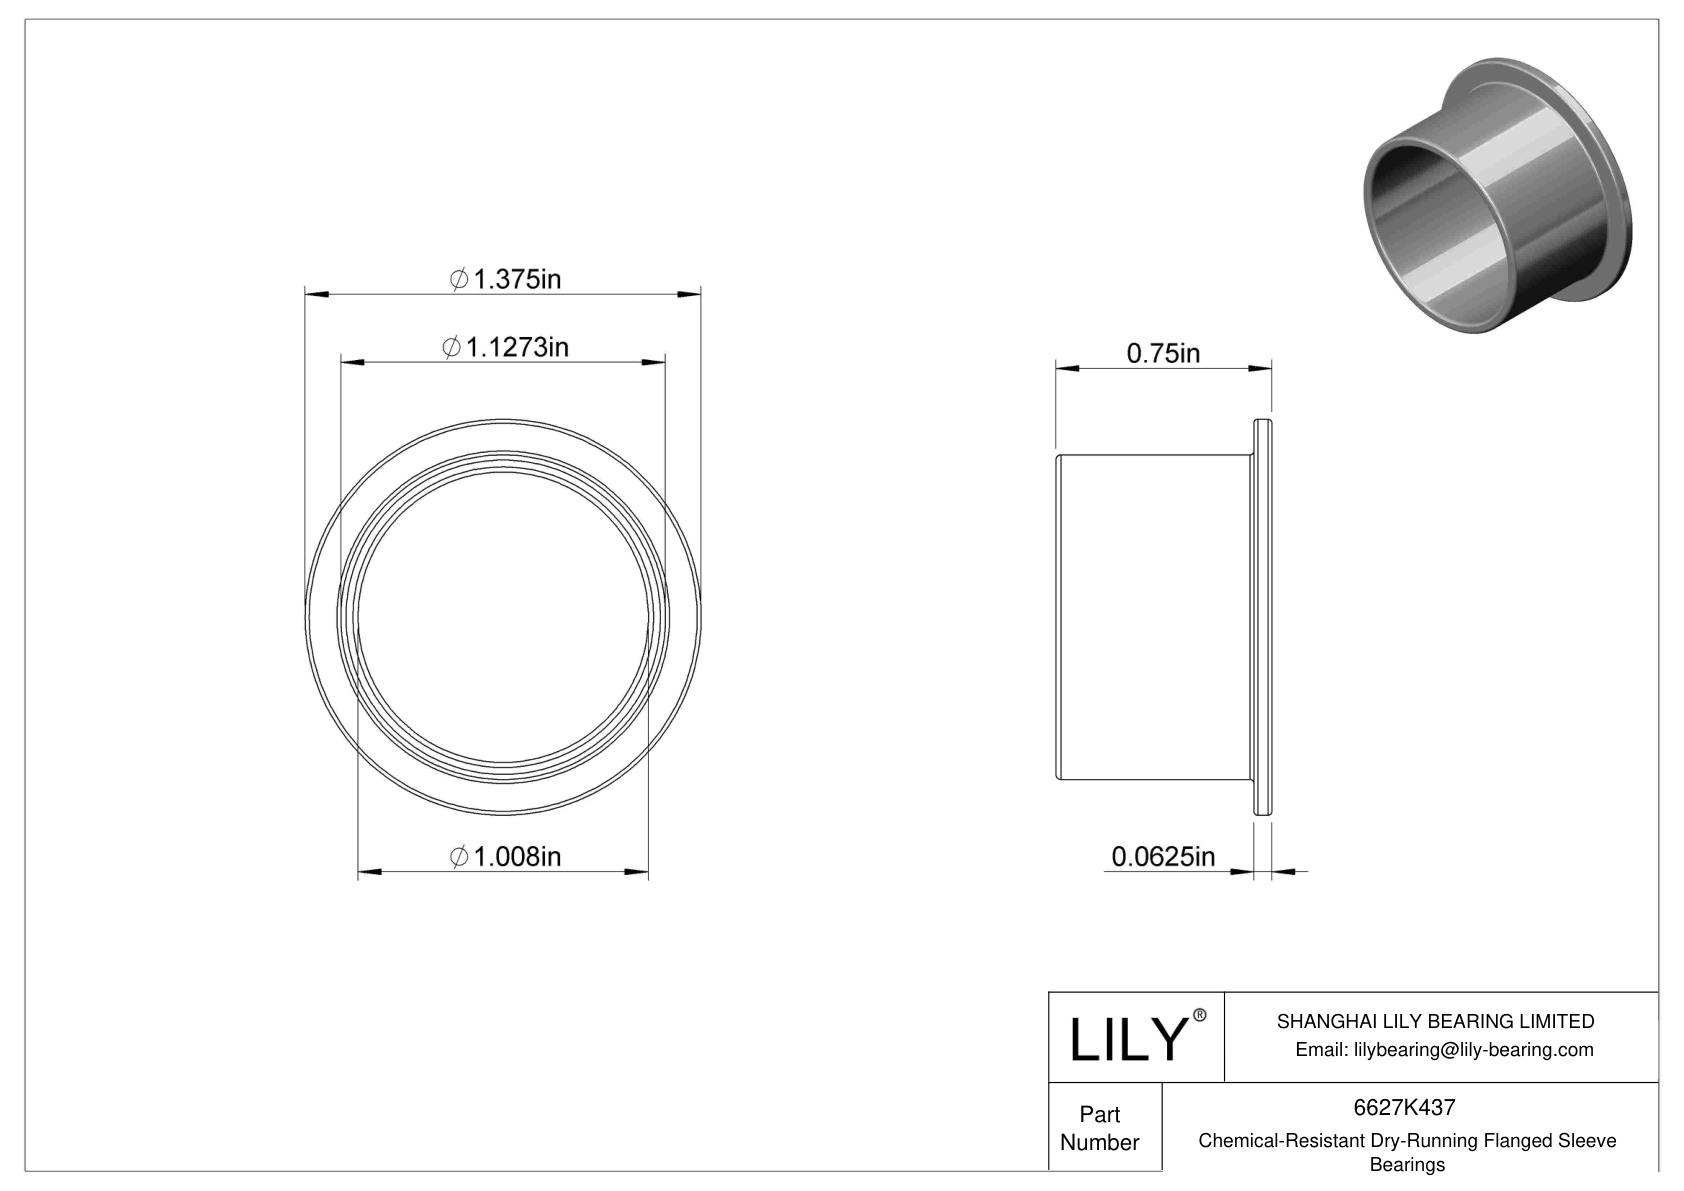 GGCHKEDH Chemical-Resistant Dry-Running Flanged Sleeve Bearings cad drawing